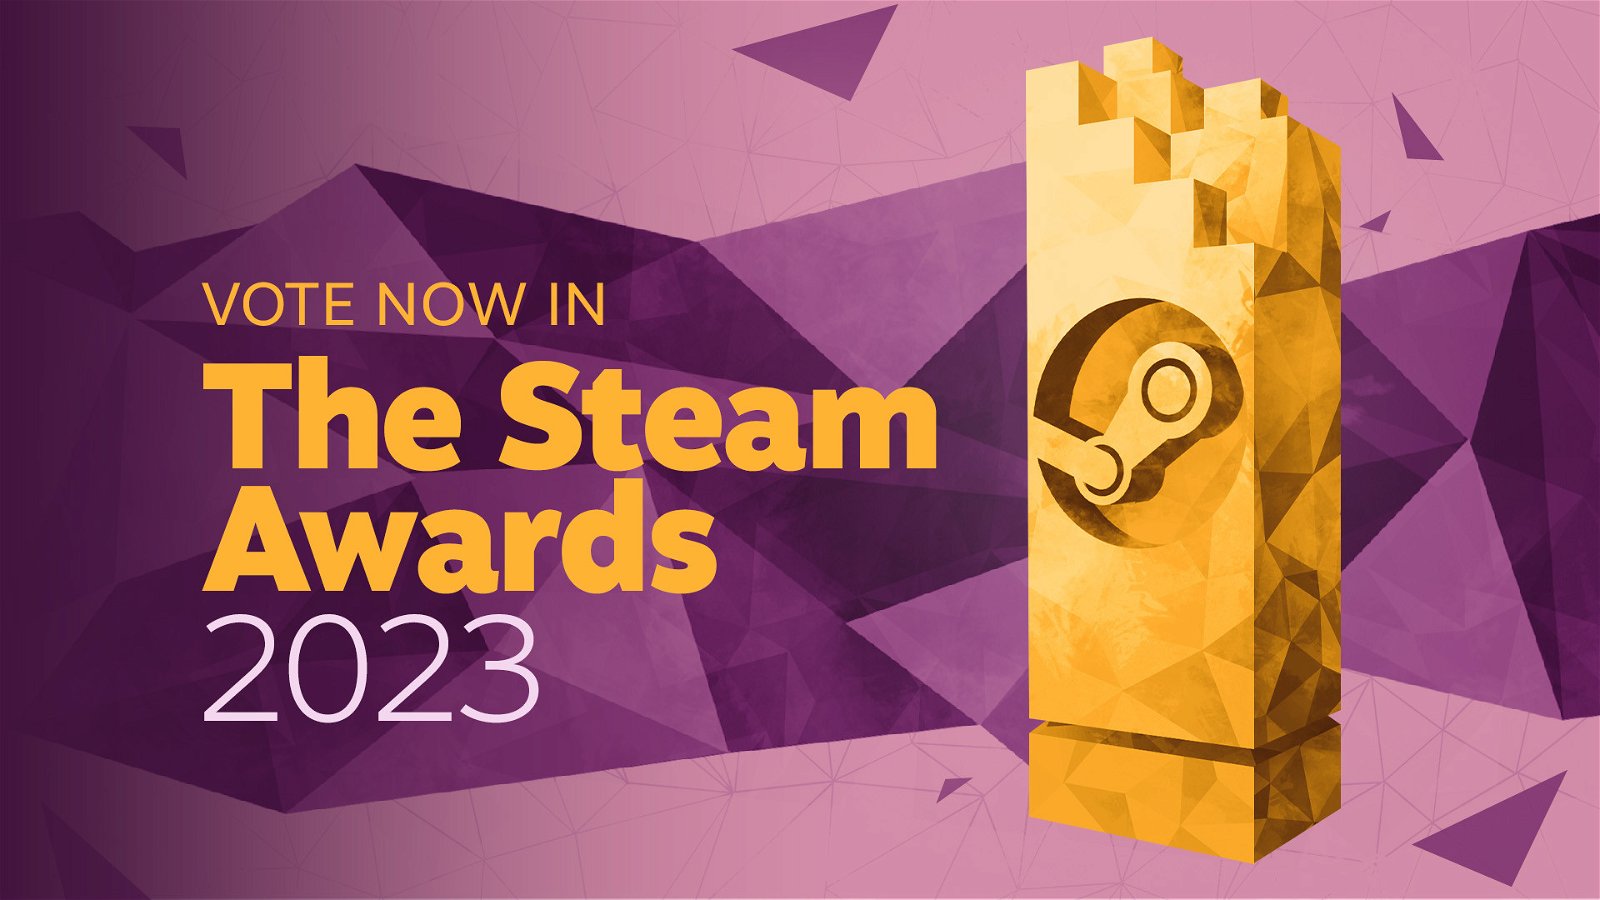 Steam Awards 2023, Baldur’s Gate 3 is the Game of the Year here are